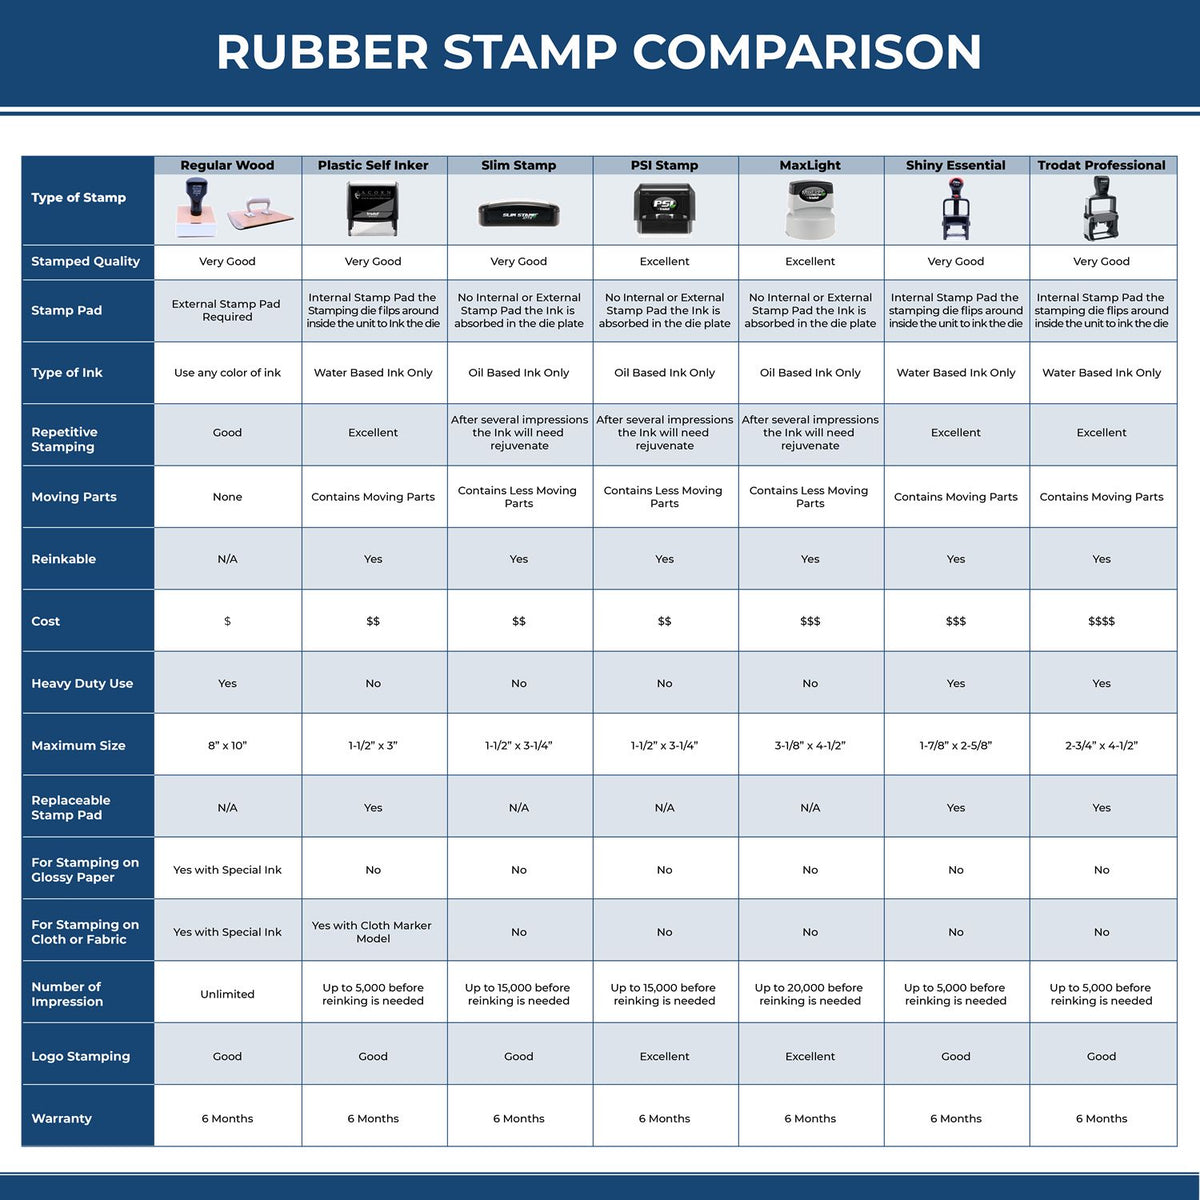 A comparison chart for the different types of mount models available for the Self-Inking California PE Stamp.